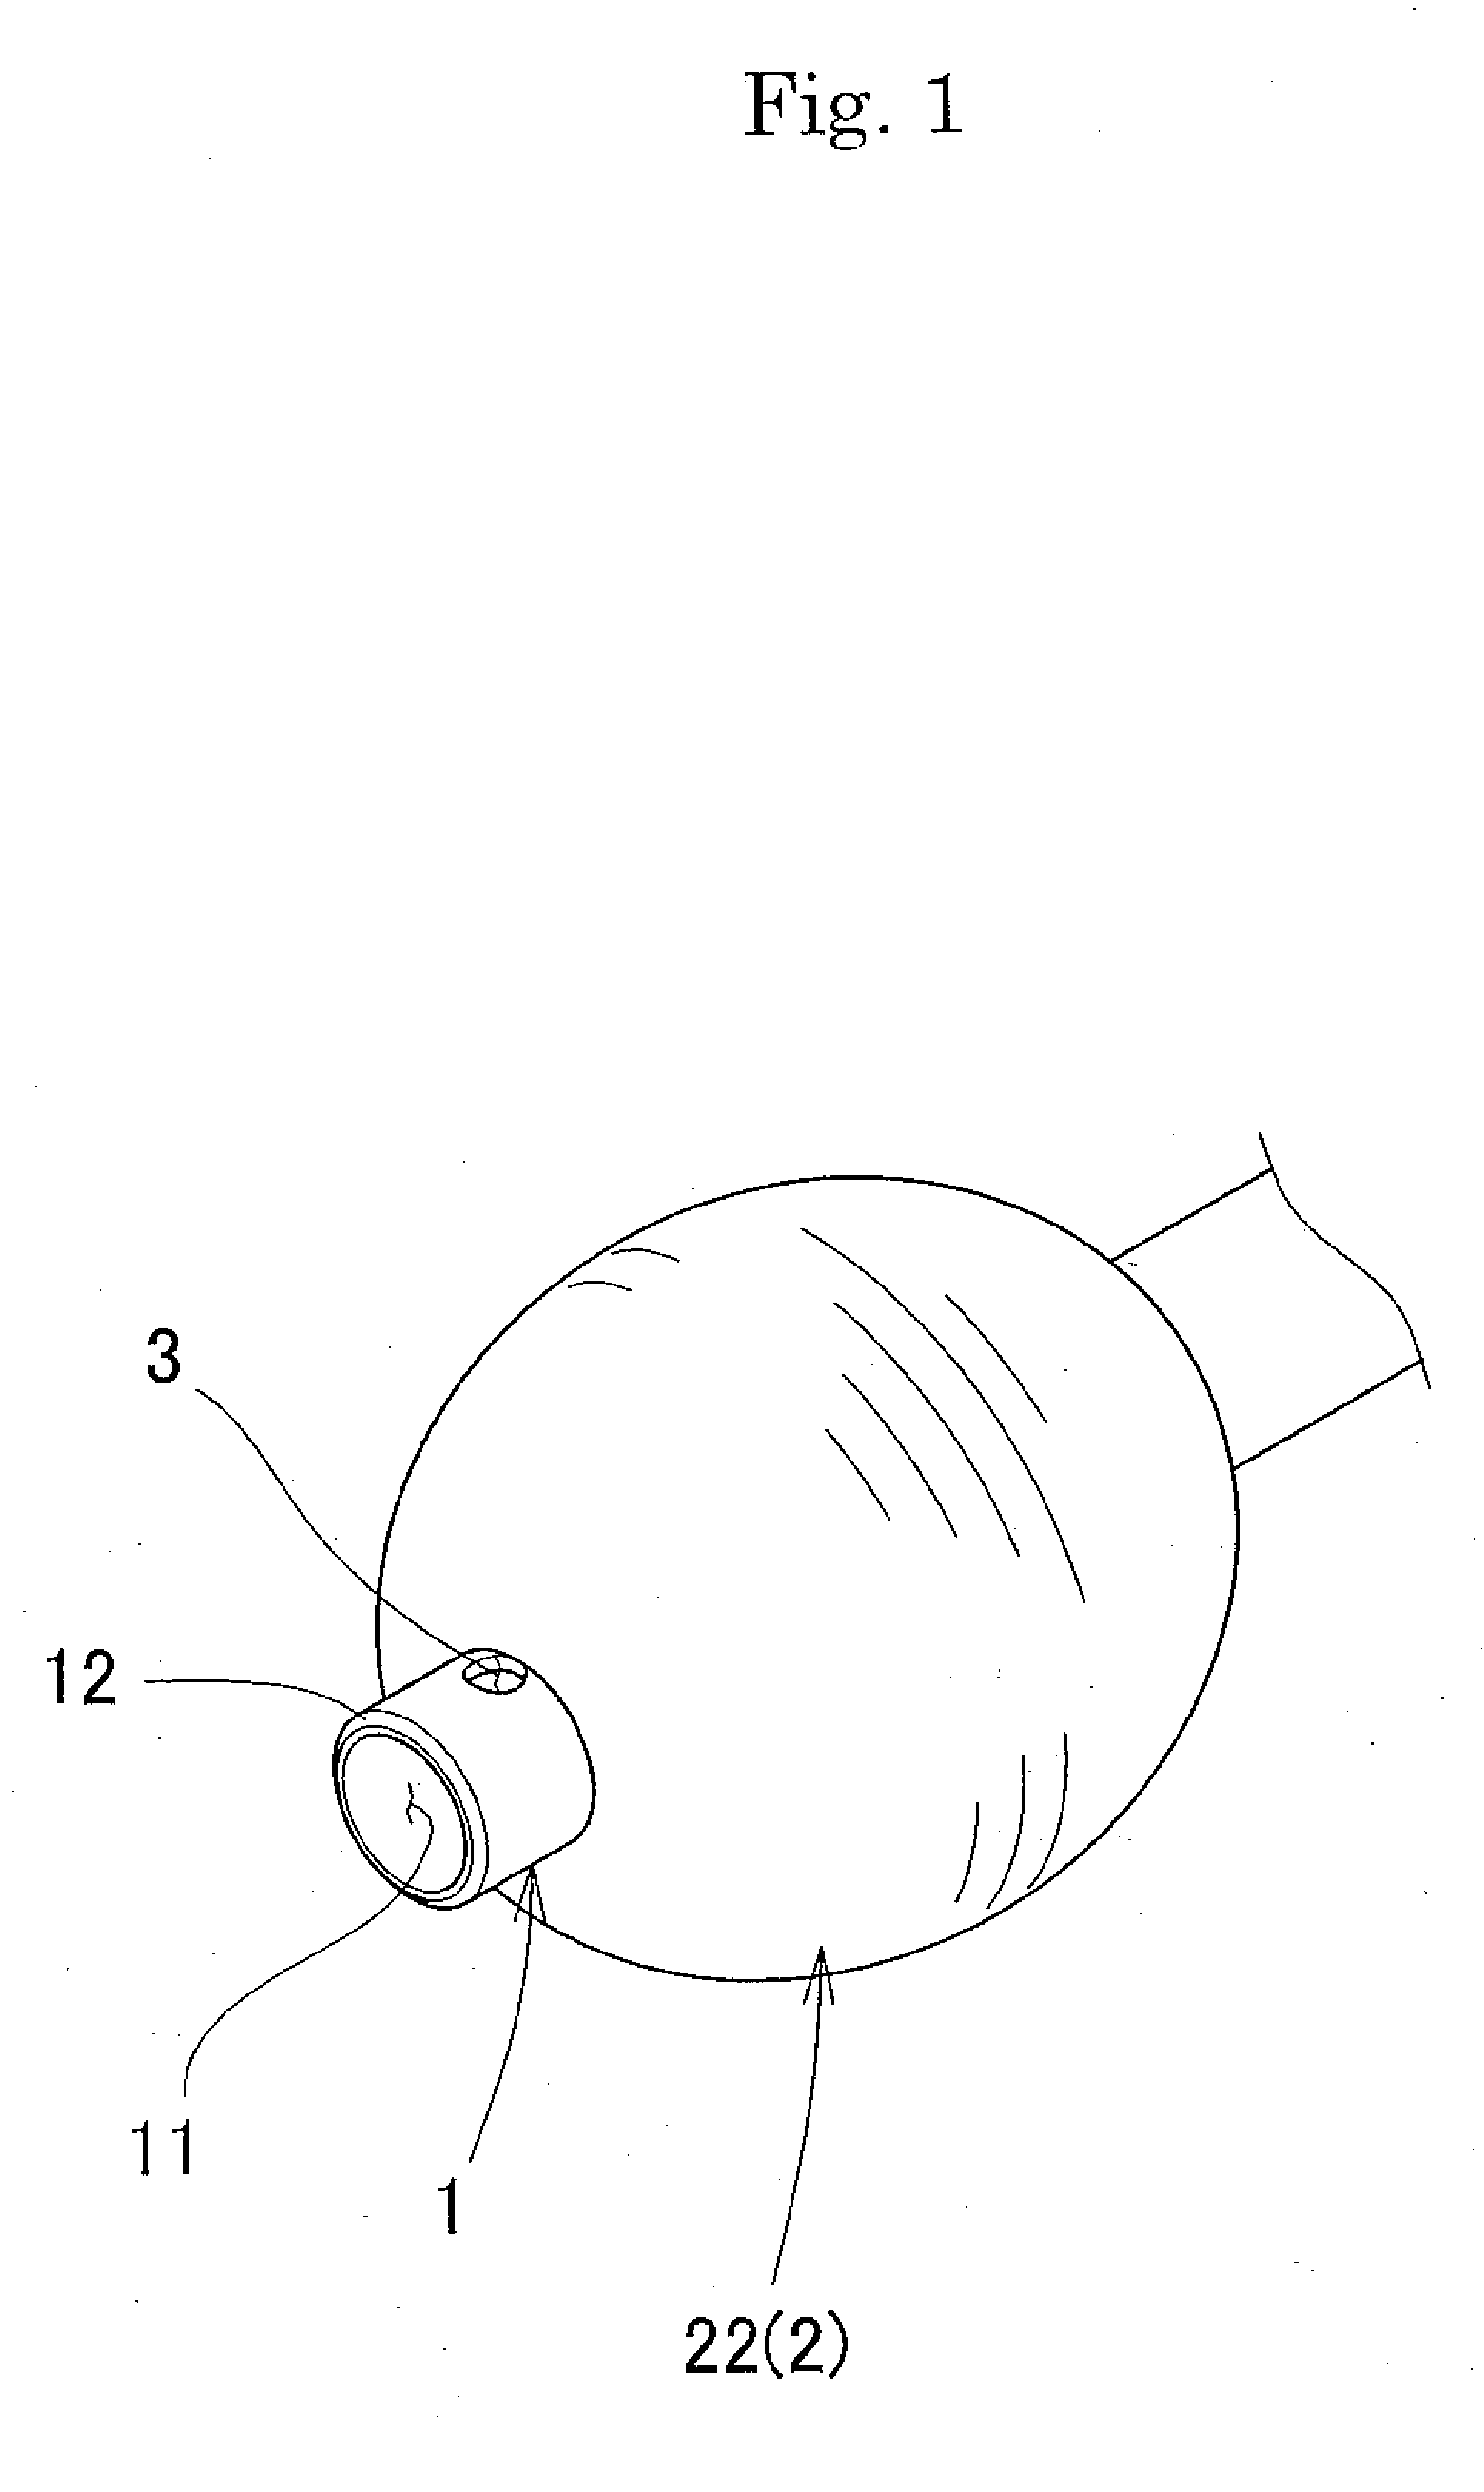 Catheter for removing foreign substance in blood vessel